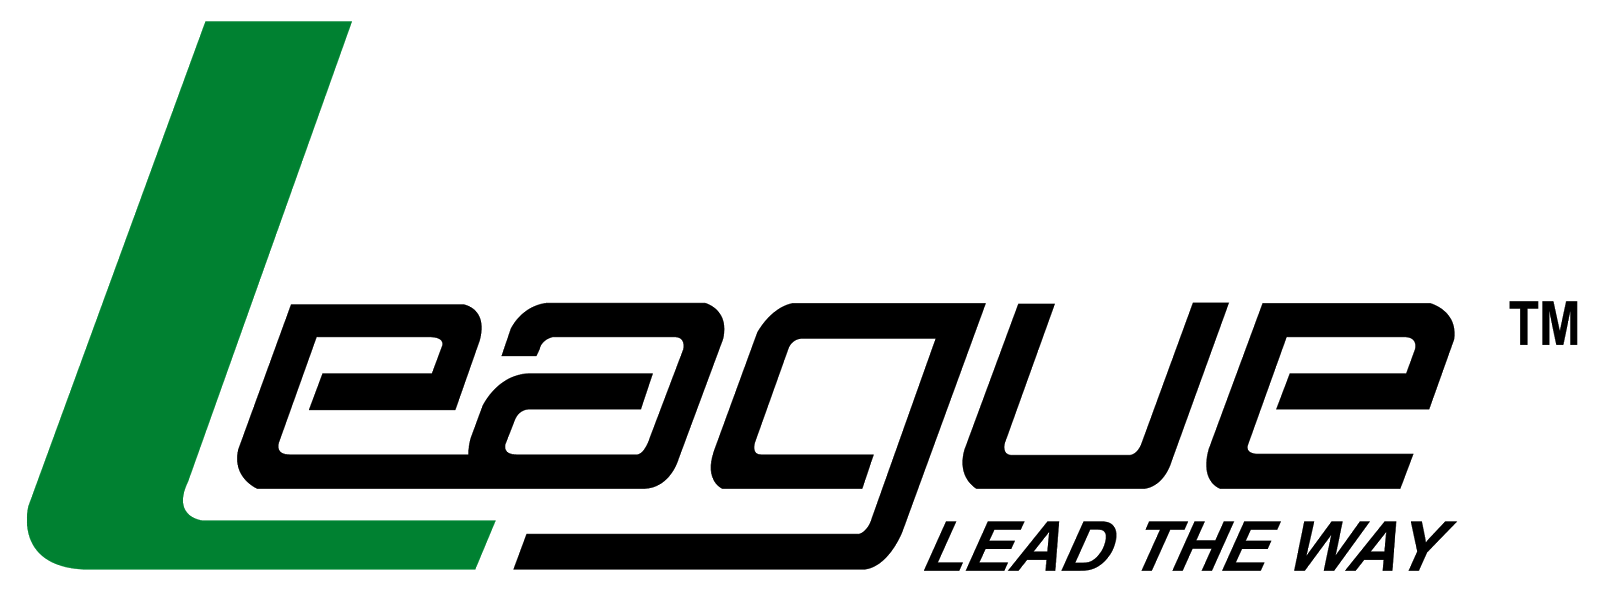 Shoes and Apparel Logo - The Brands – League Shoes